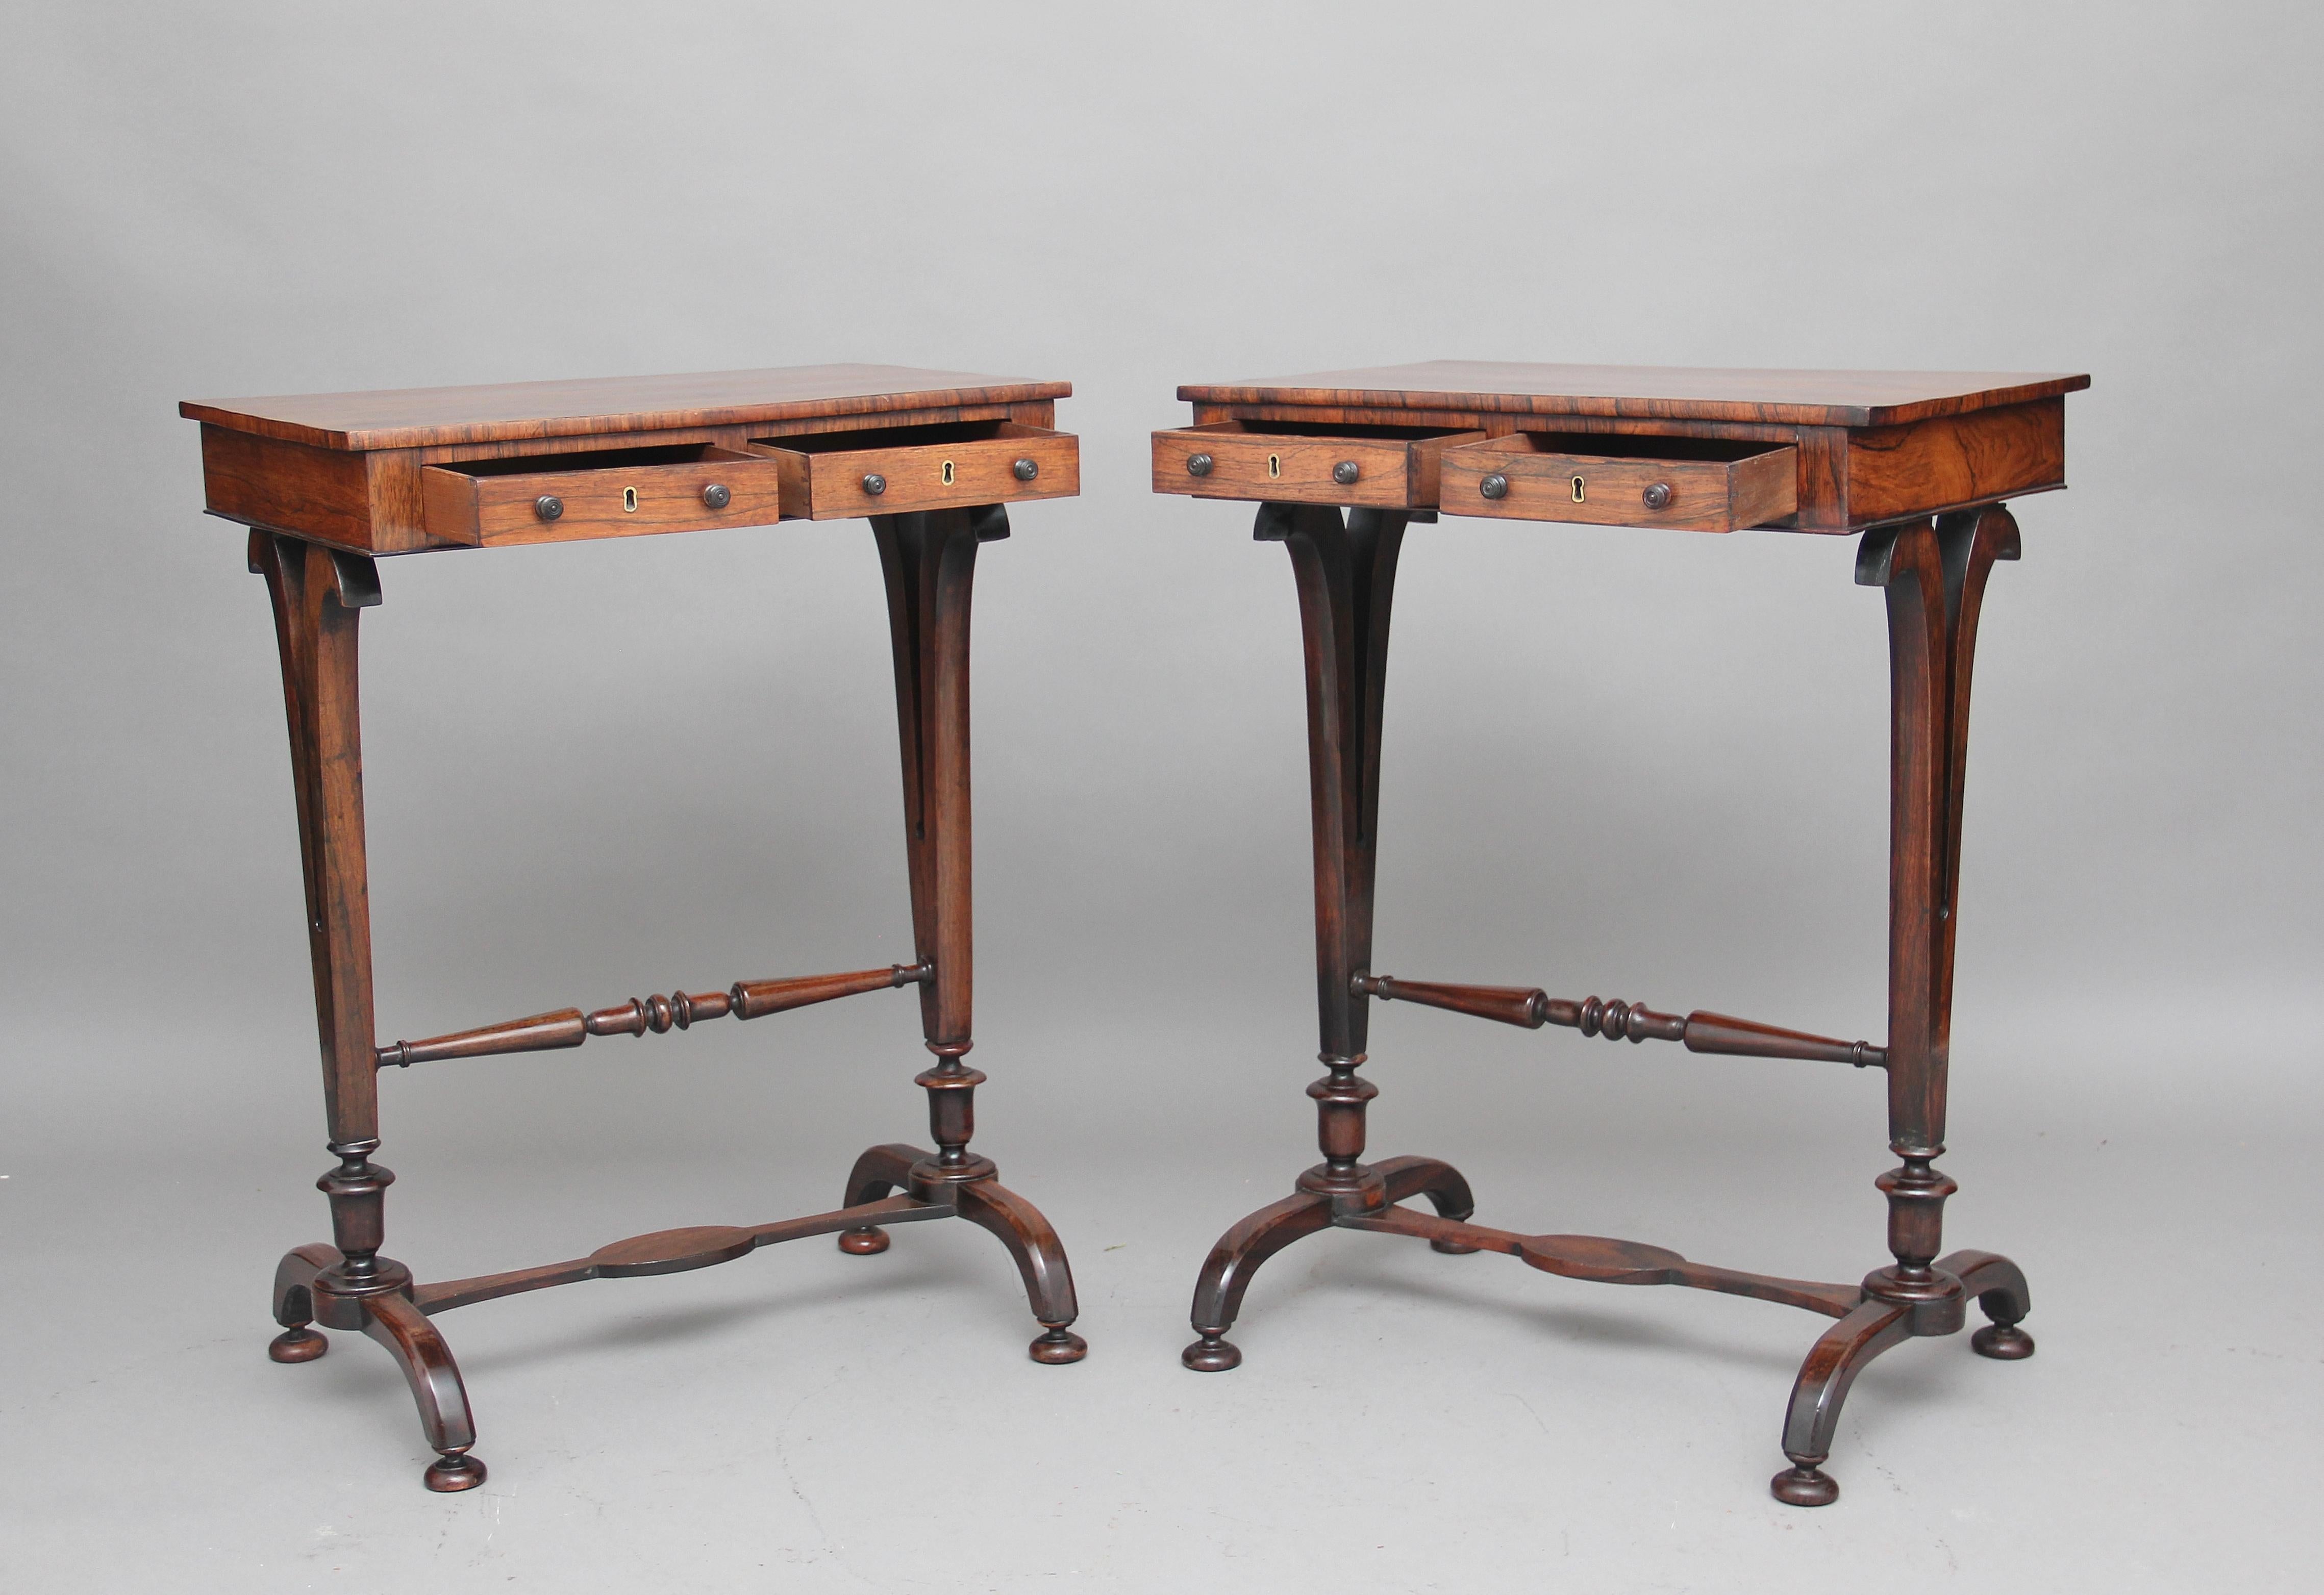 A fine pair of 19th century rosewood lamp / side tables, each with a pair of mahogany lined drawers with original turned wooden knobs and a pair of dummy drawers on the reverse, with nicely shaped end supports united by a turned stretcher, standing